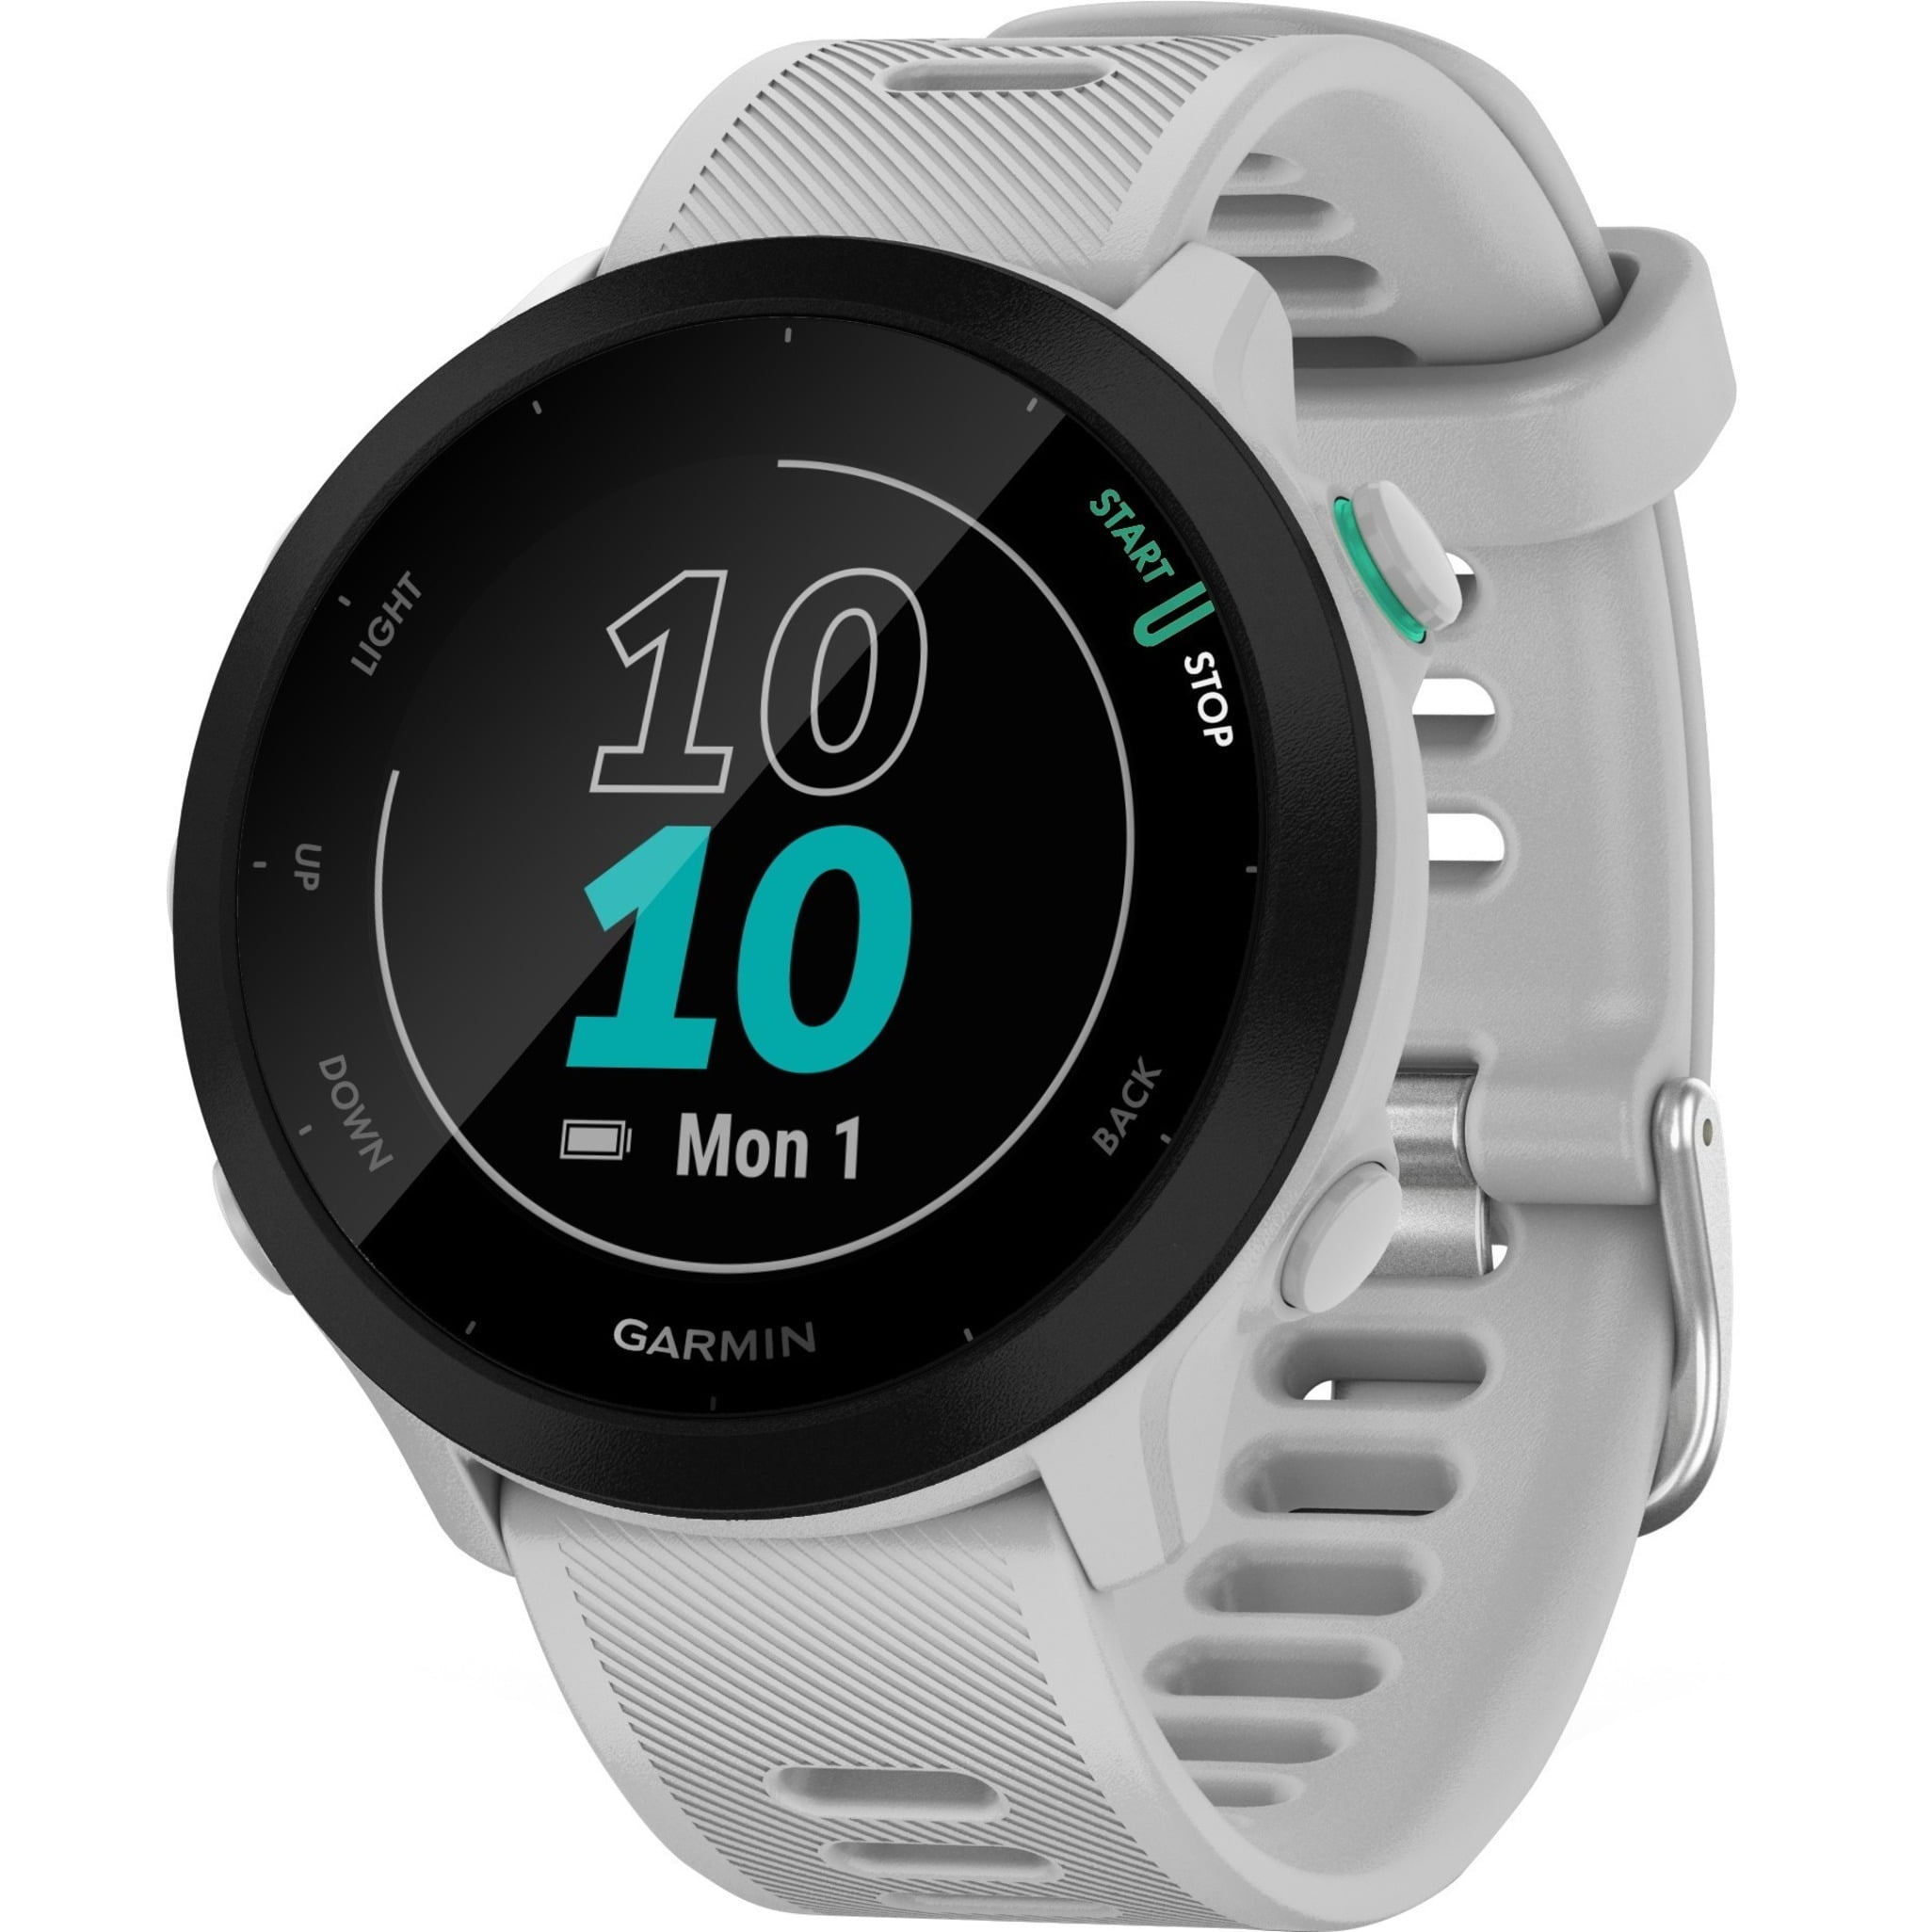 Garmin Forerunner 55 Review - Top Tips & Comparison to FR 45